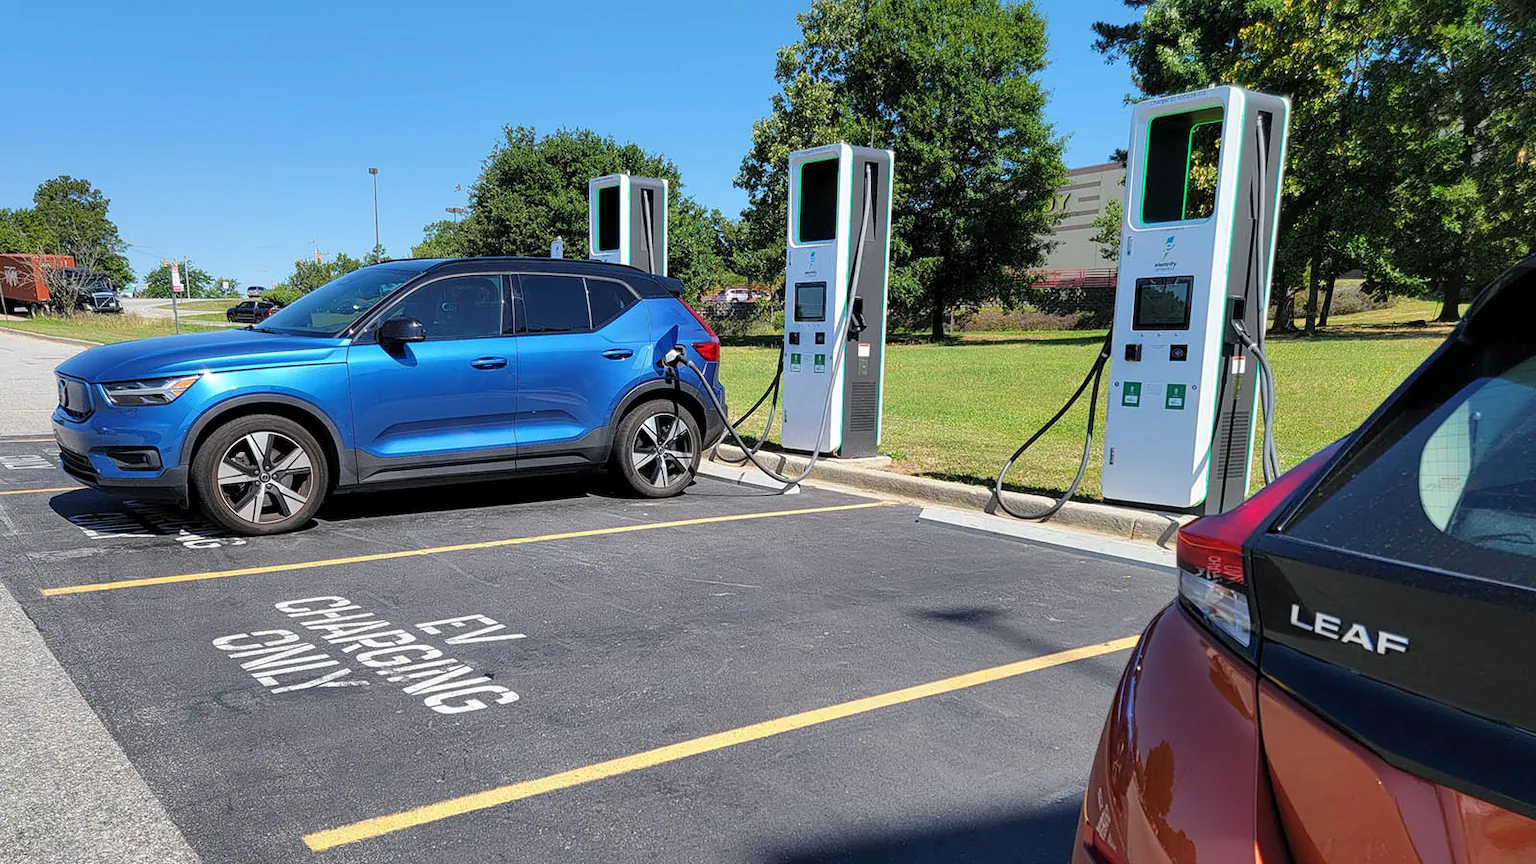 The decision to install EV chargers at dealerships isn’t about bowing to political pressure or simply jumping onto the green bandwagon.